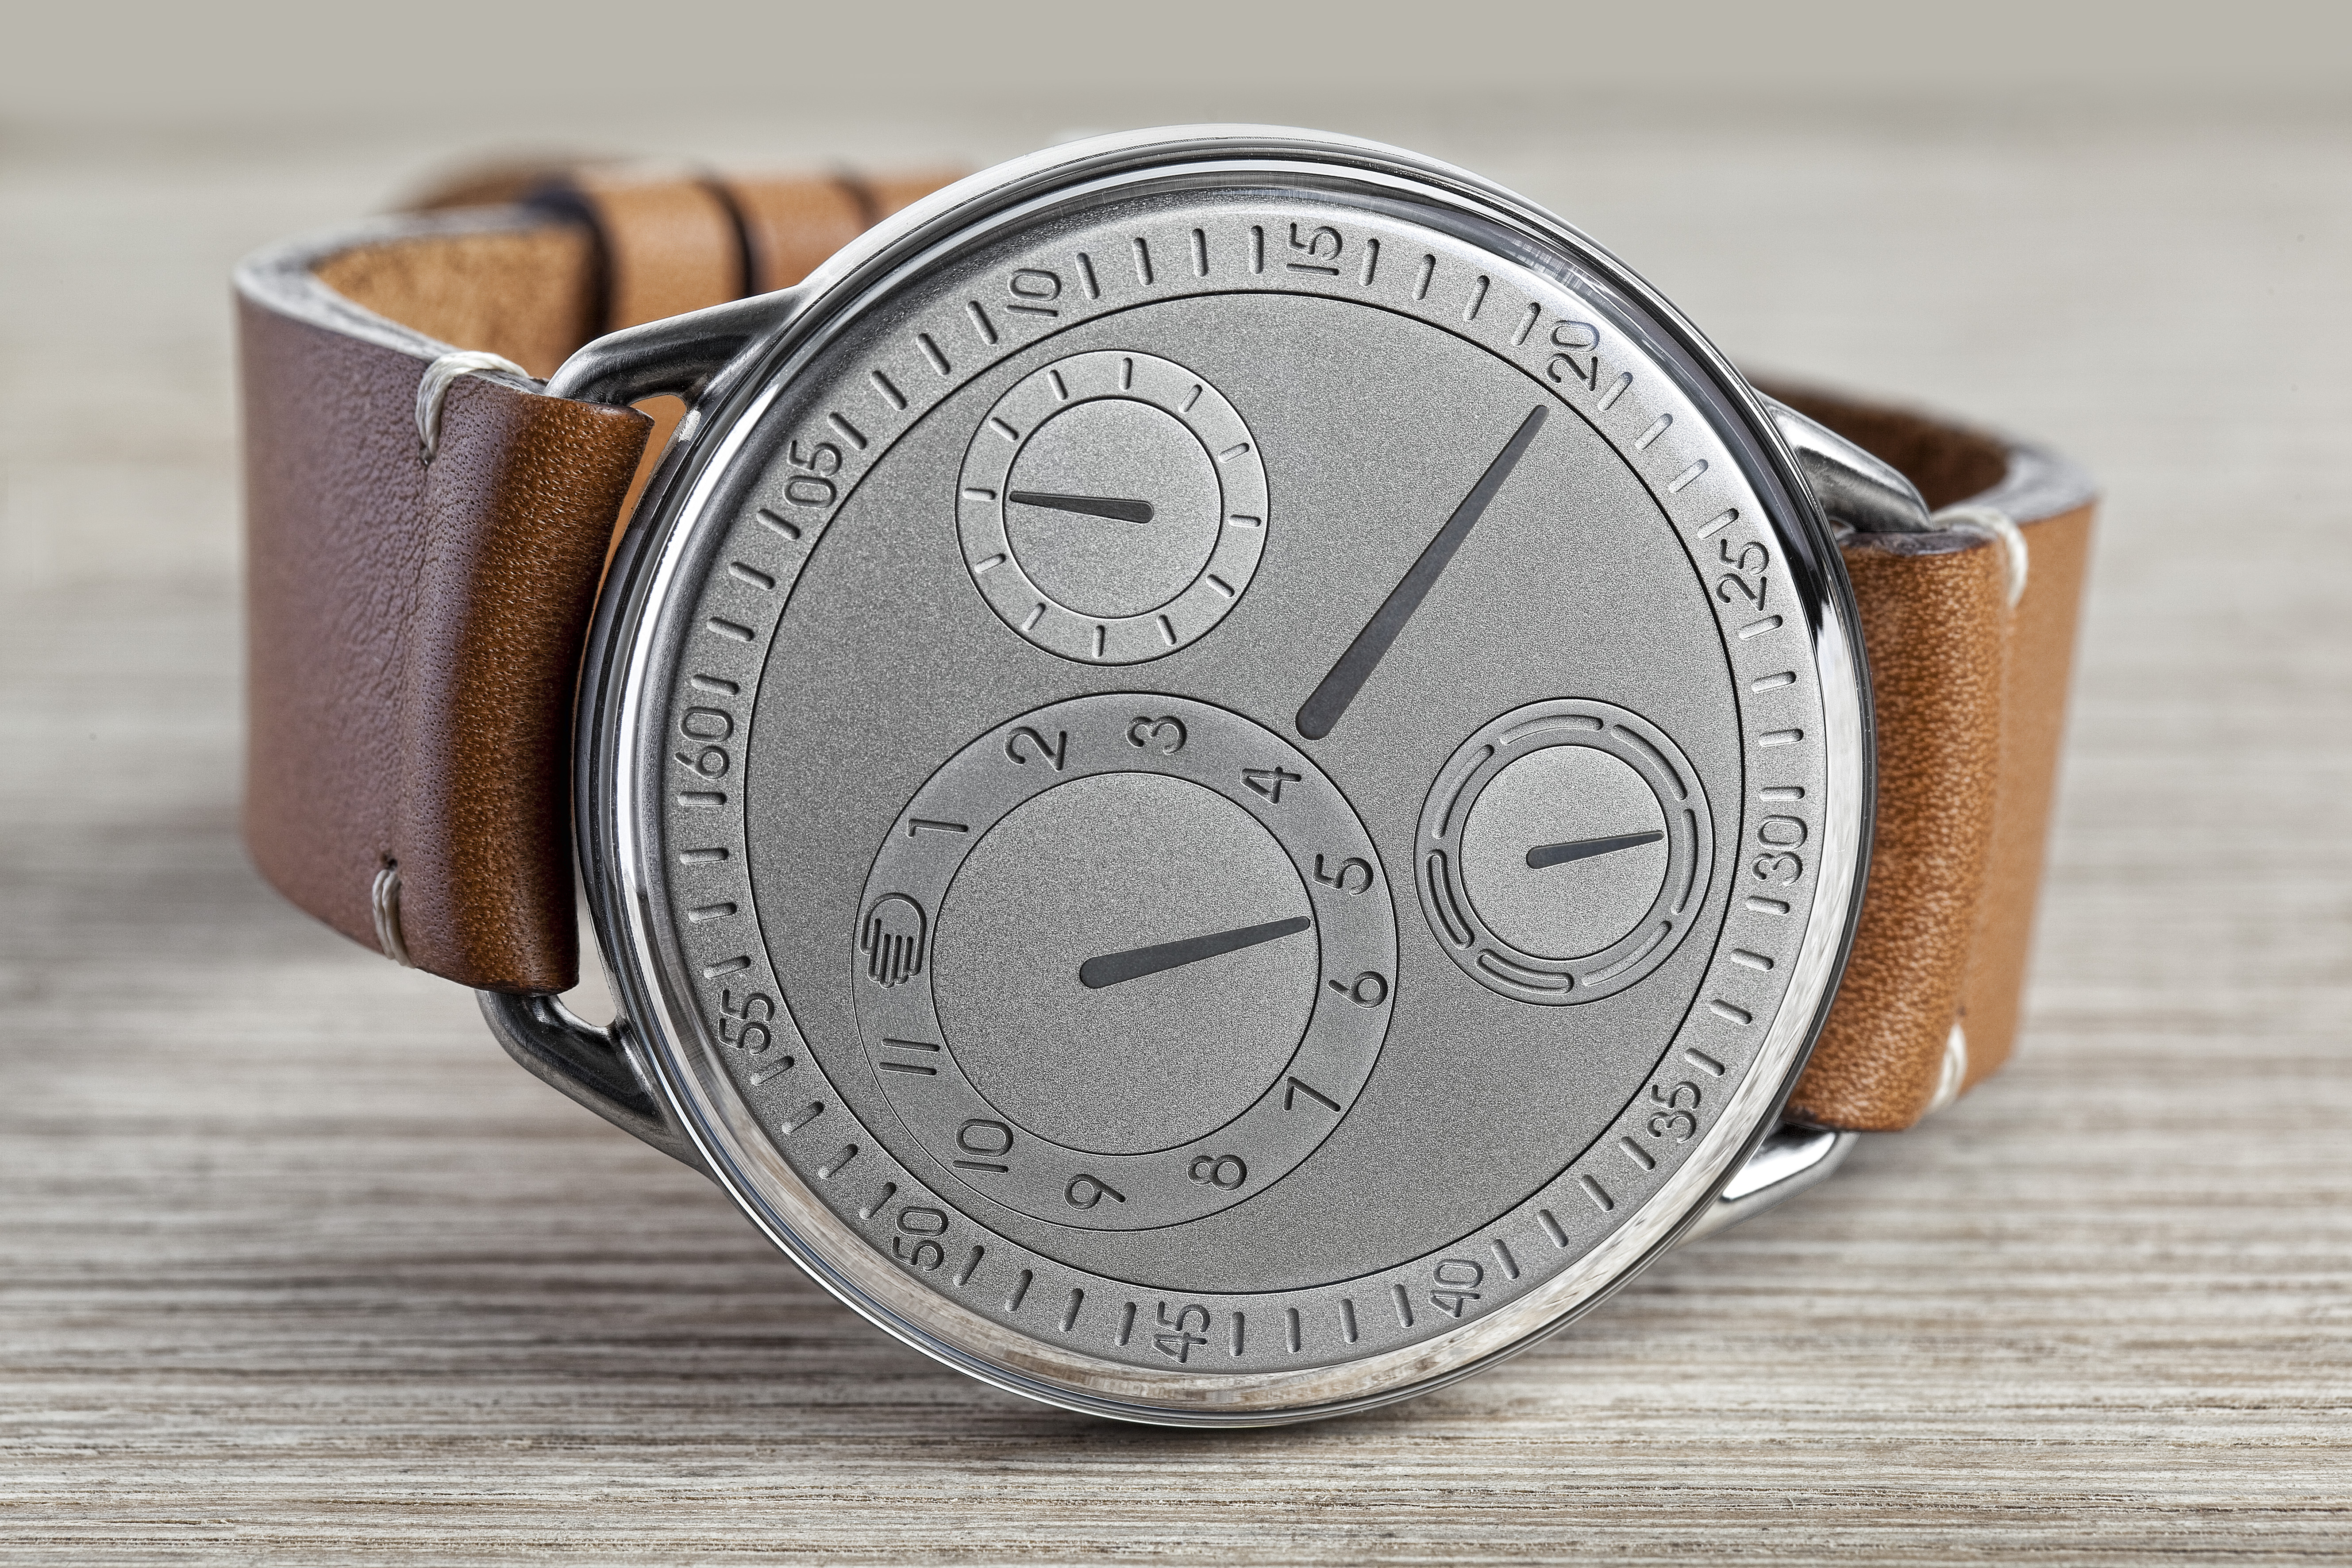 Ressence Type 1° 42.7 mm Watch in Black Dial